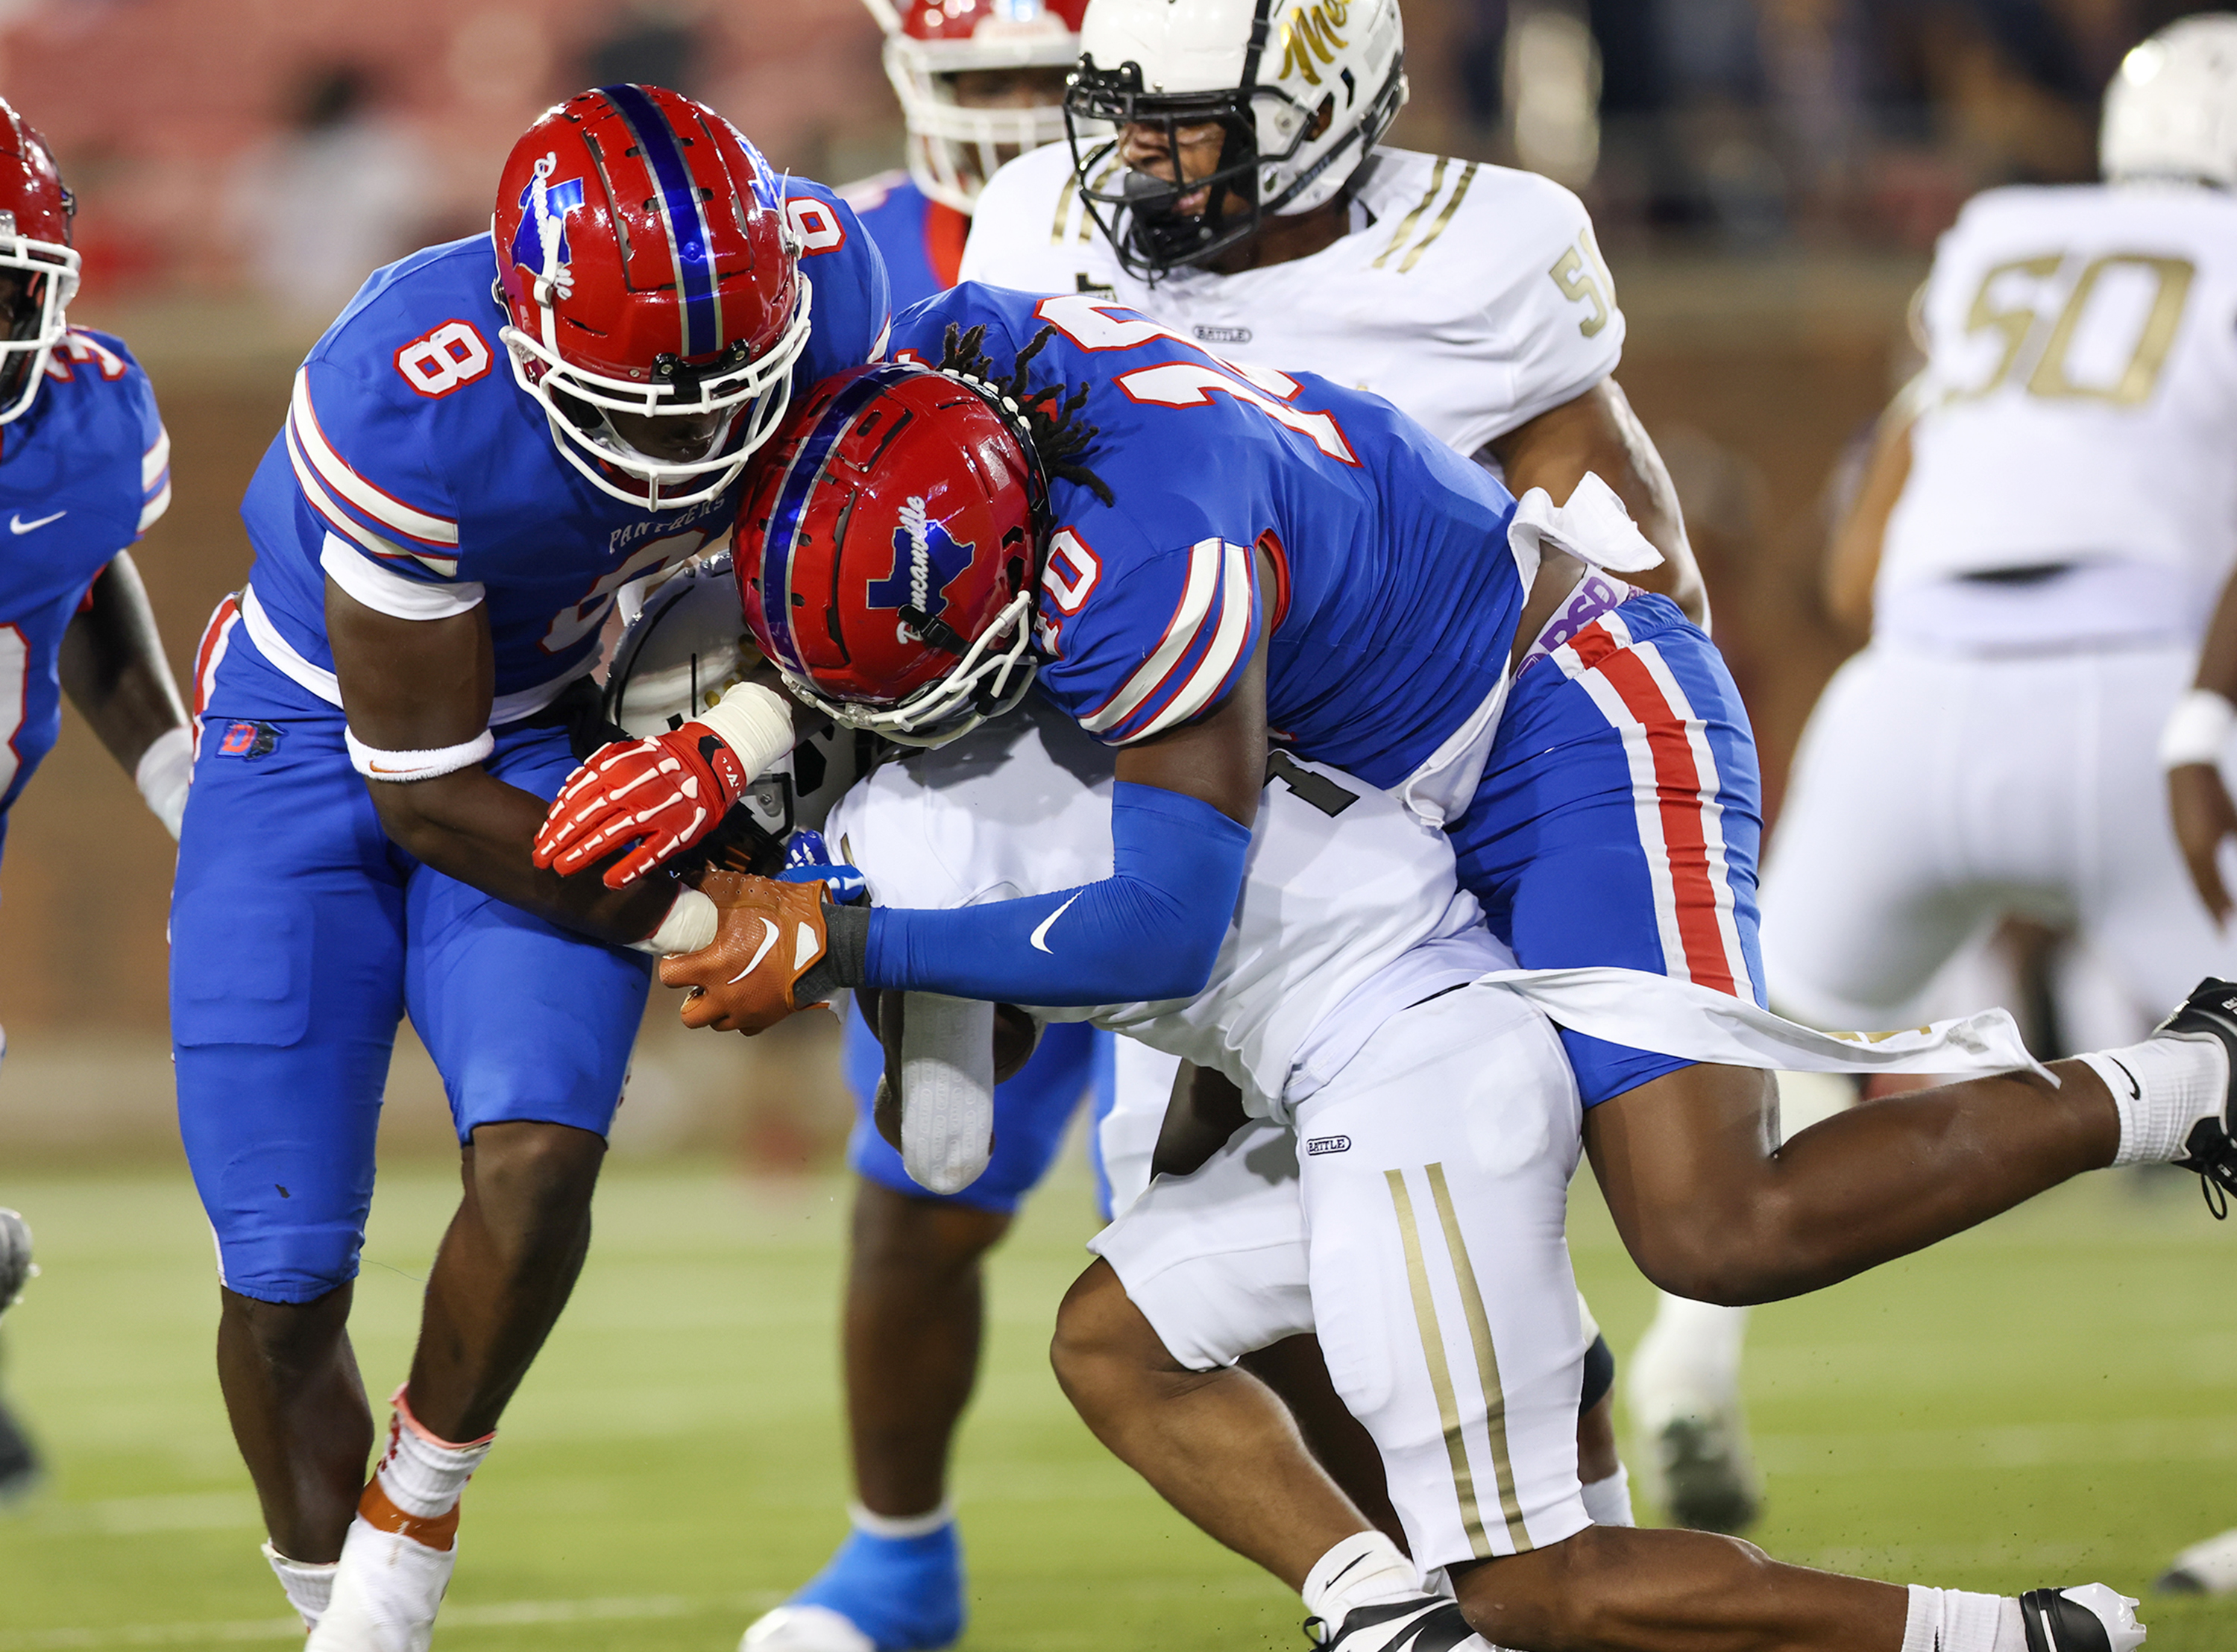 Duncanville beats South Oak Cliff in clash of Texas state football